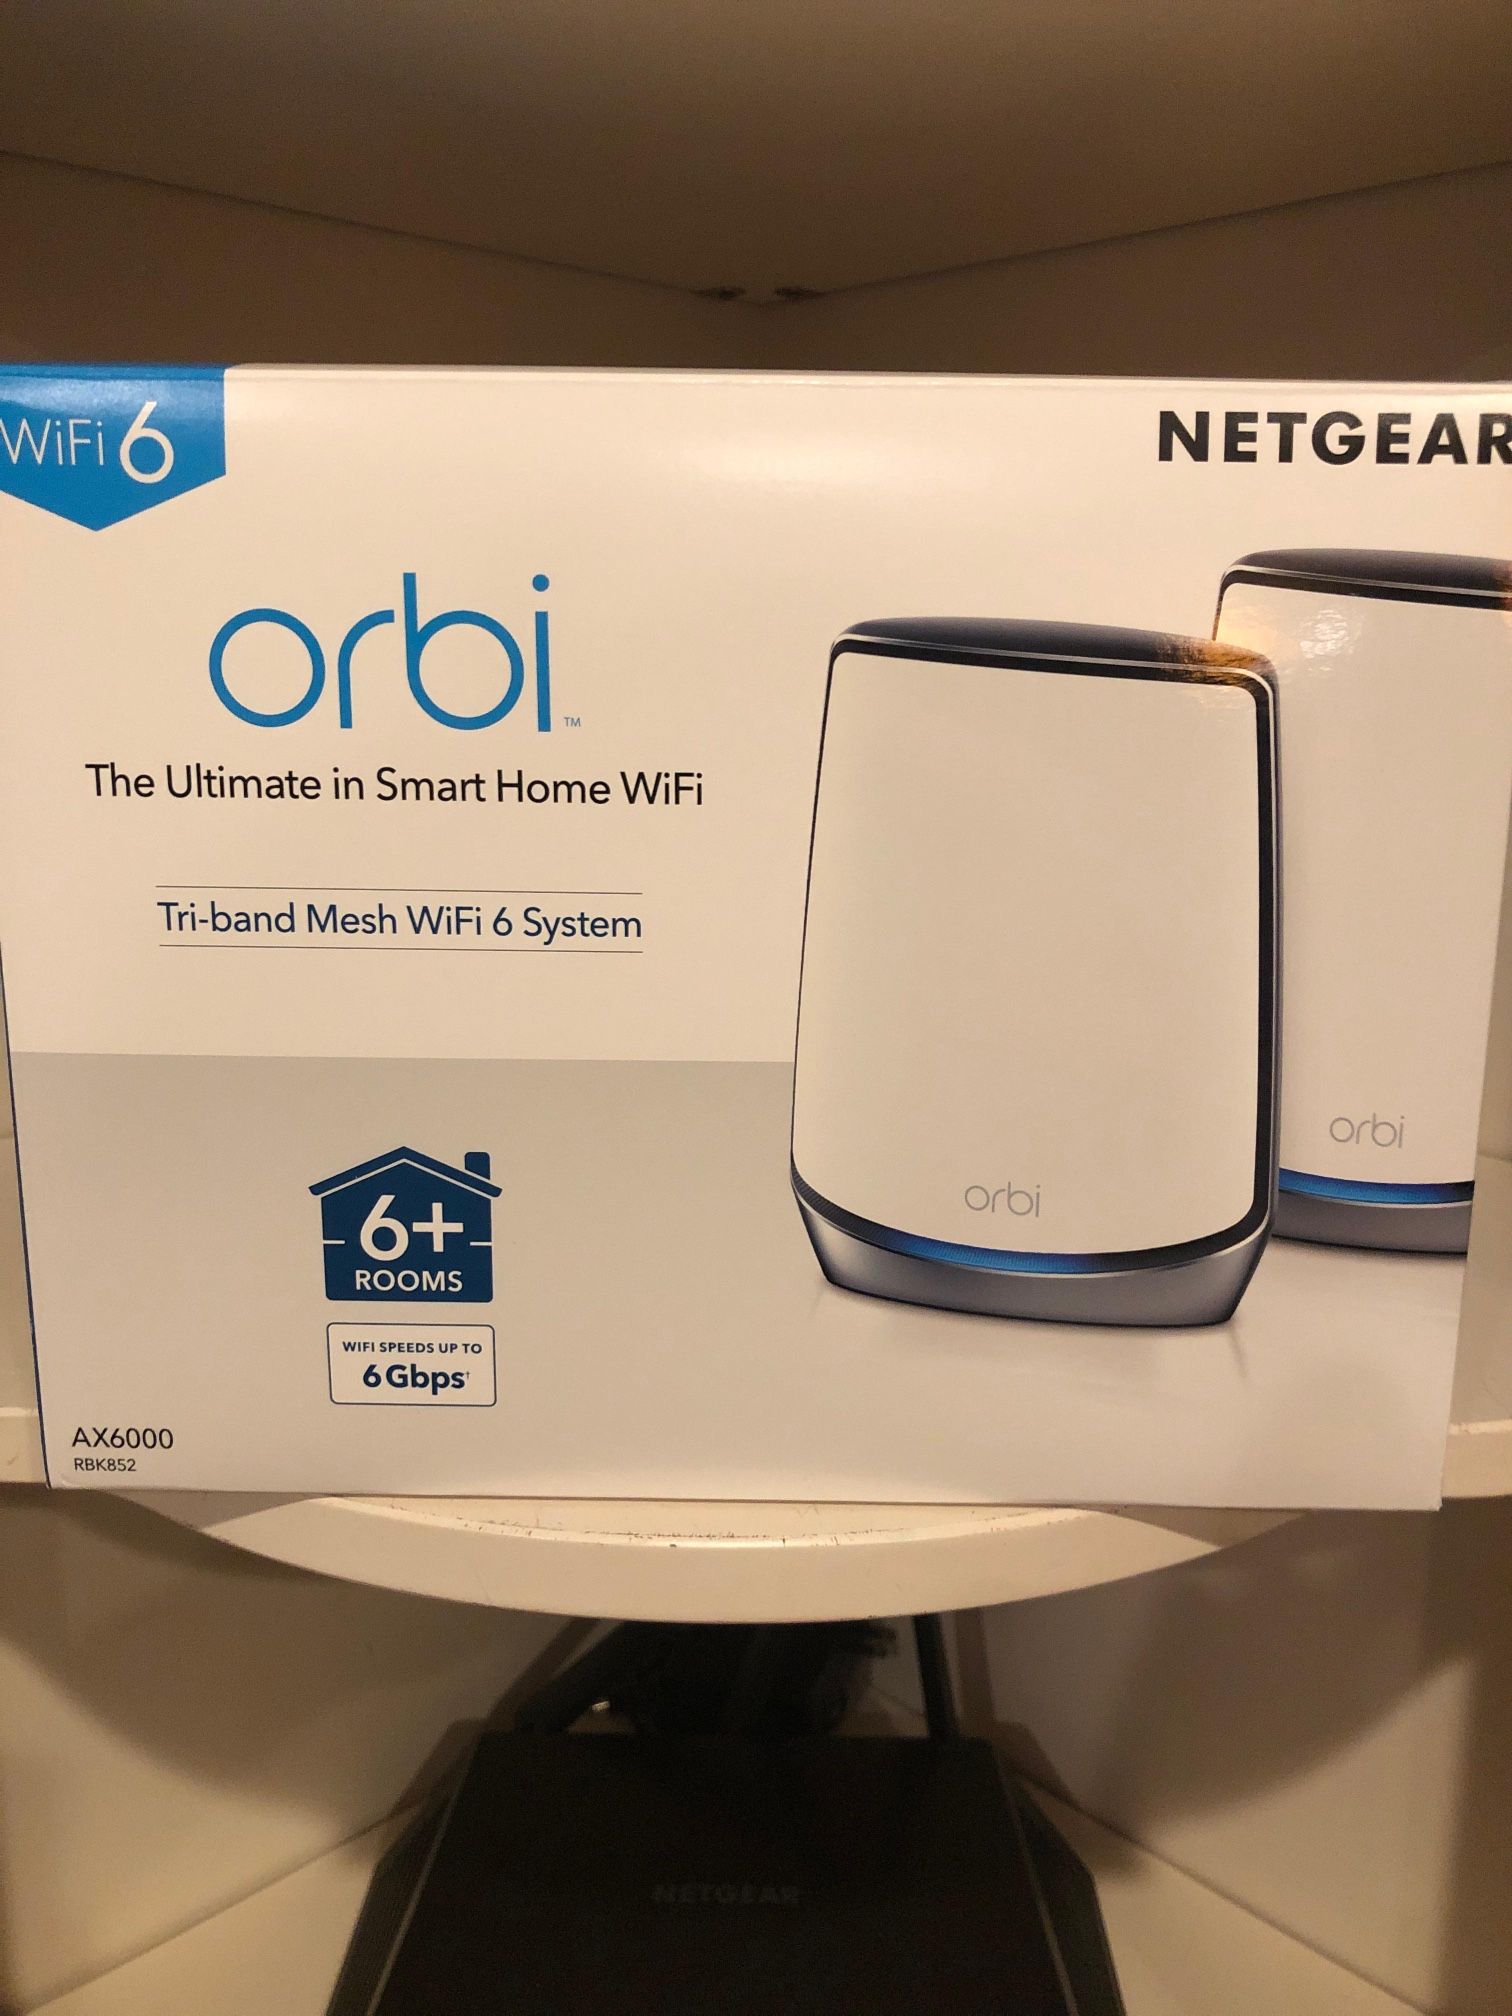 Orbi Tri-band WiFi 6 mesh system with 6Gbps, Router + 1 Satellite